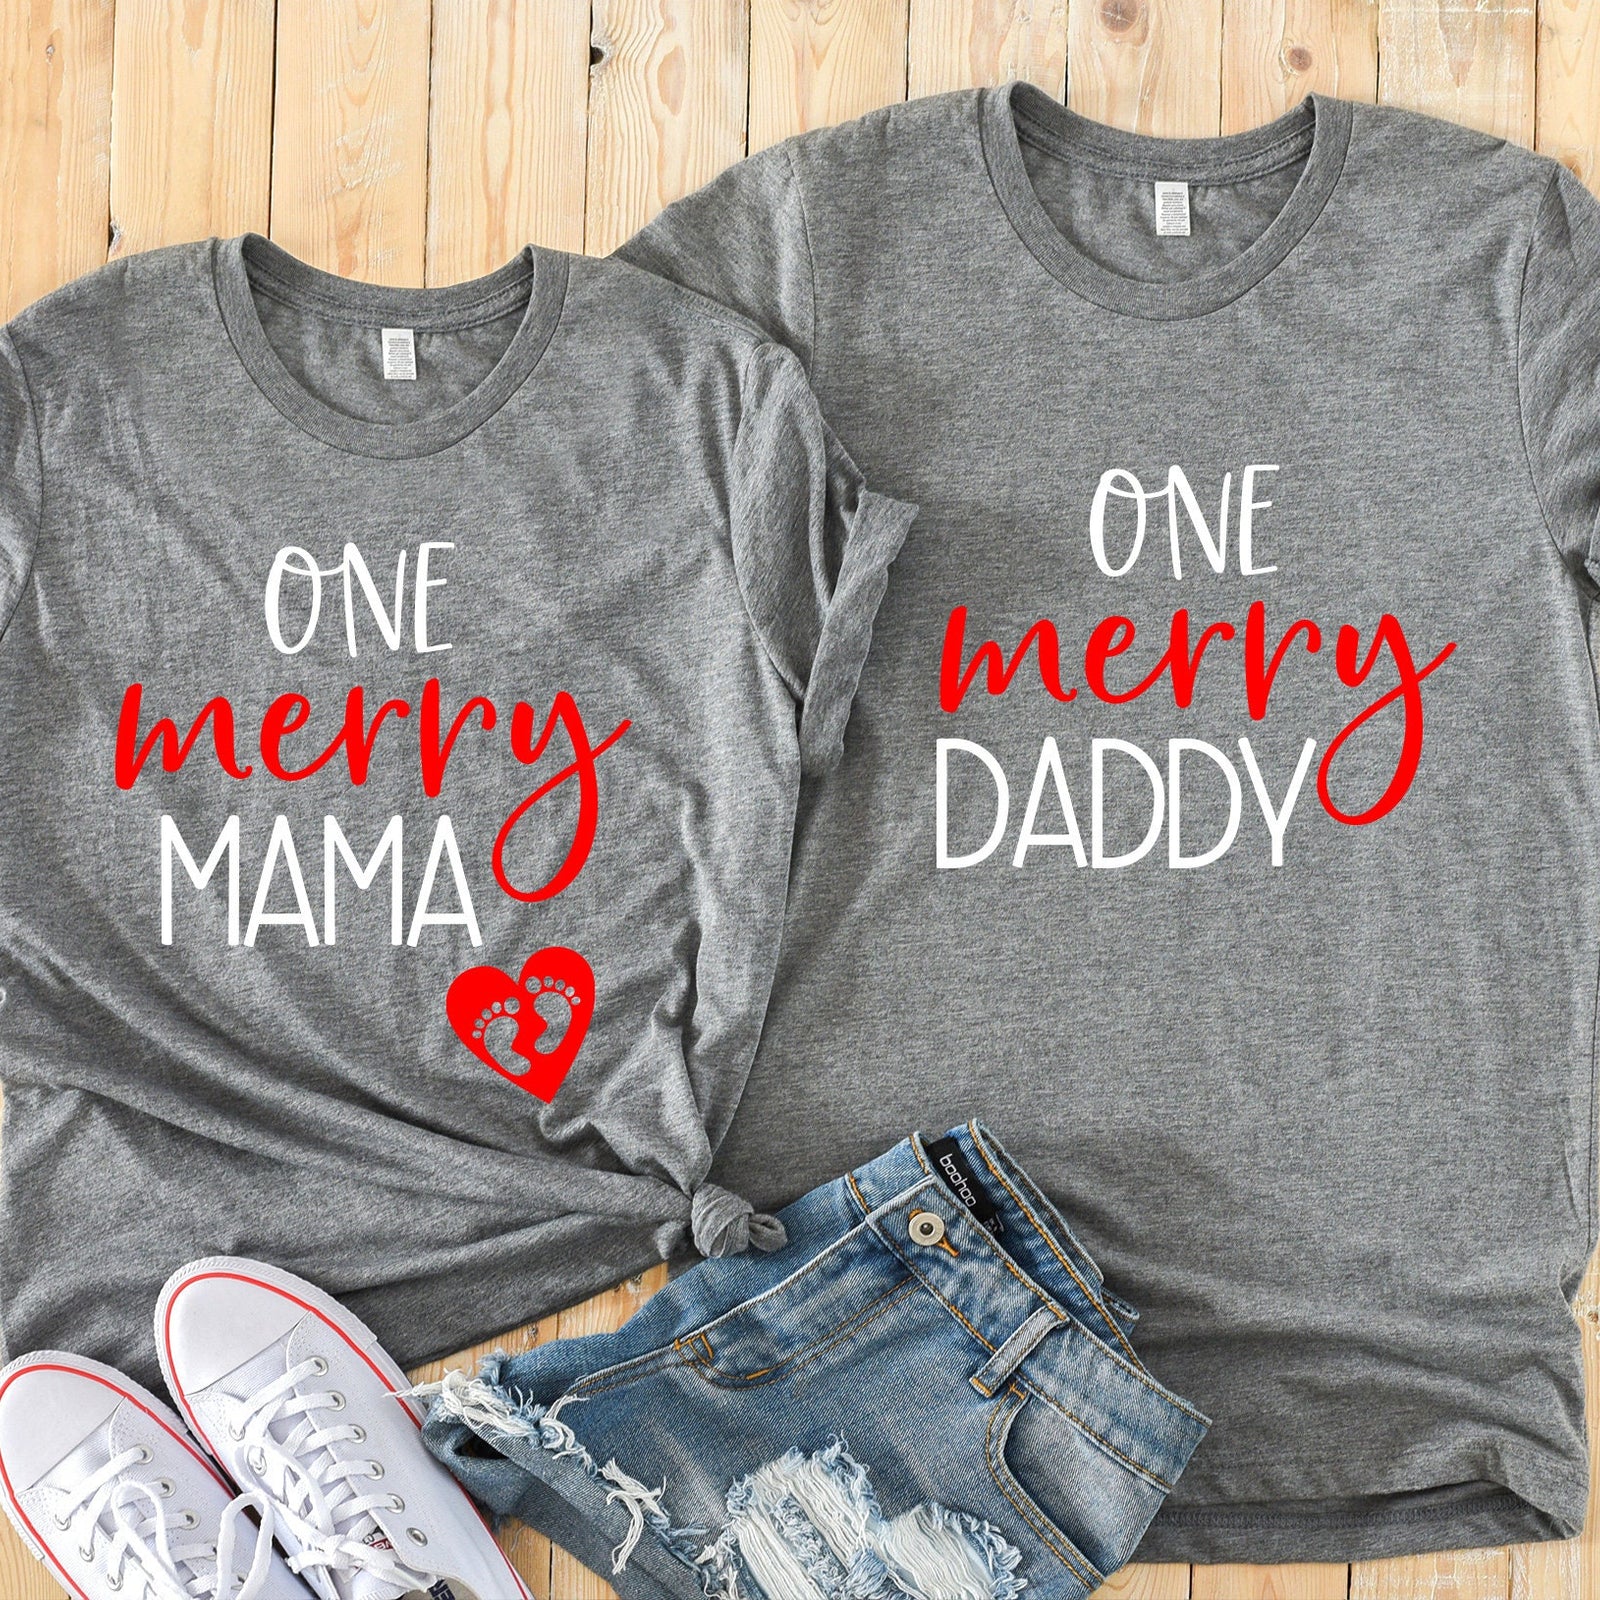 One Merry Mama - One Merry Daddy - Christmas Couple Shirts - Cute Pregnancy Baby Announcement Shirt - Baby Reveal Christmas Parents Shirt